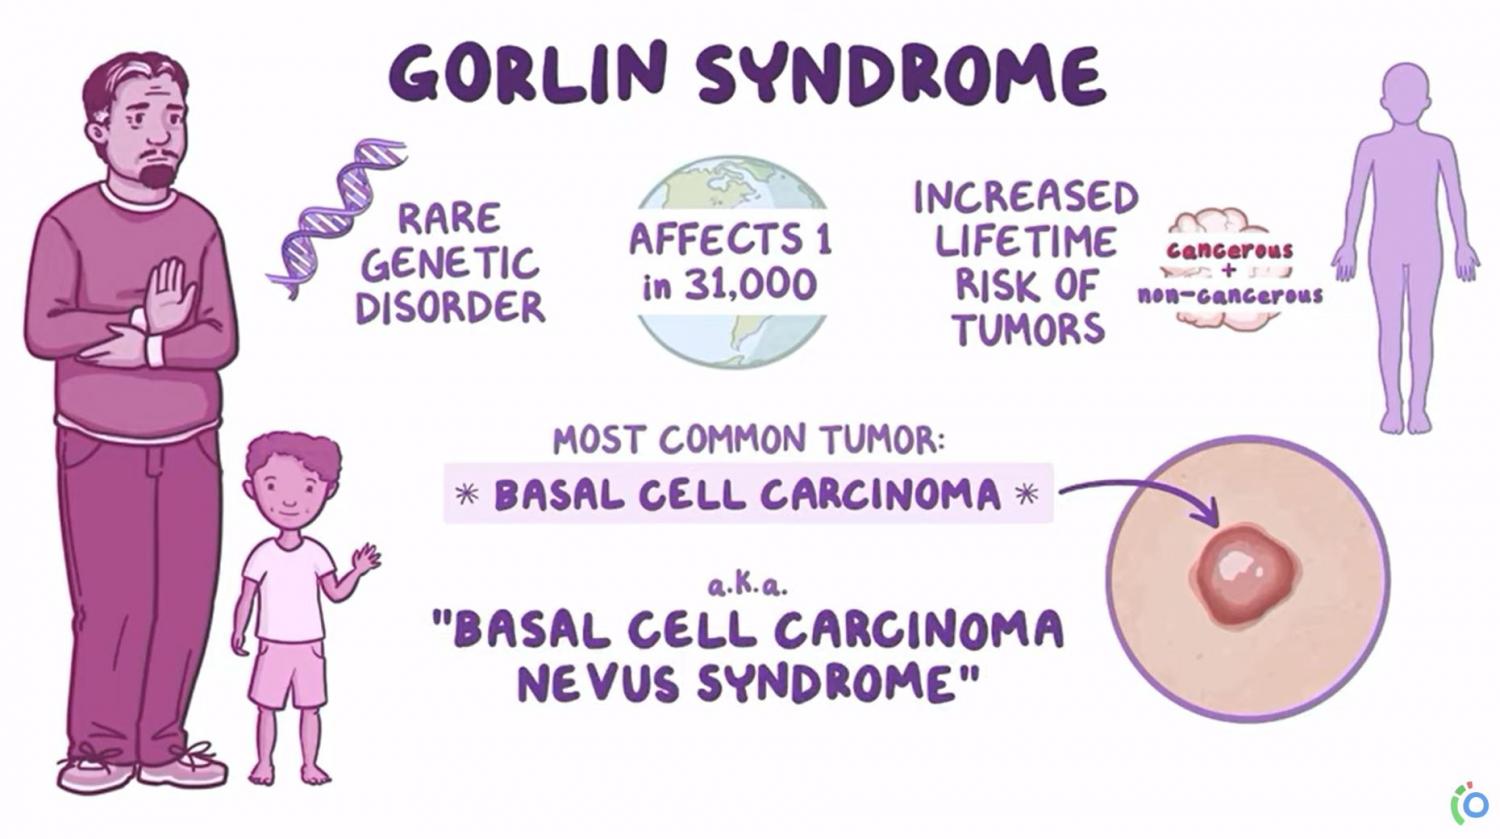 Graphic of gorlin syndrome